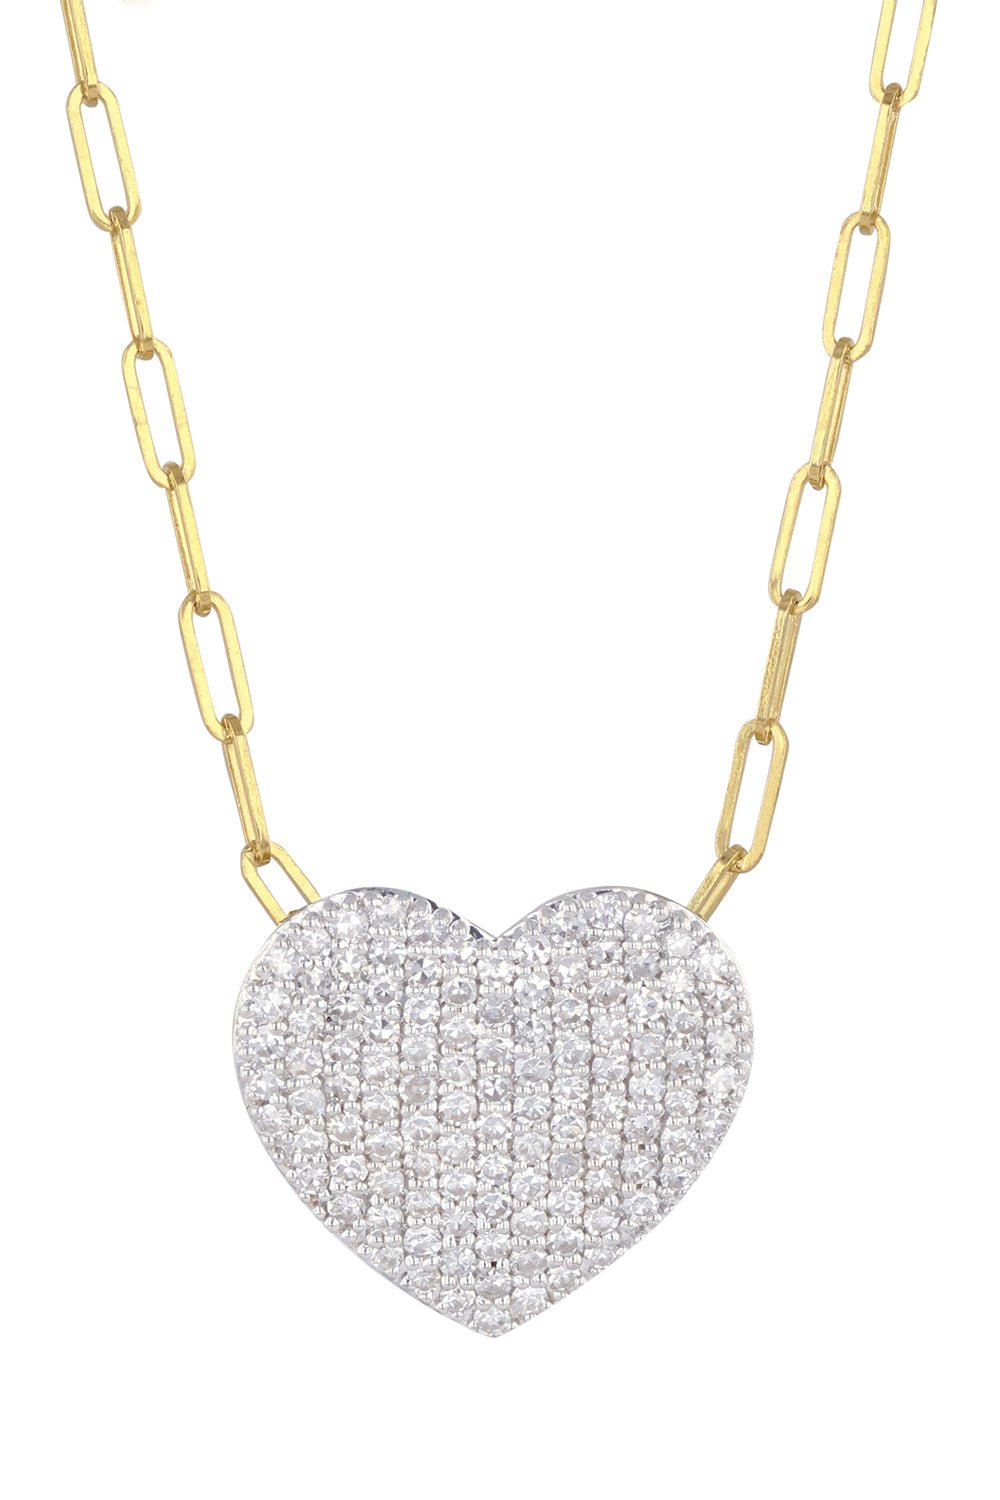 PHILLIPS HOUSE-Heart Infinity Necklace-YELLOW GOLD